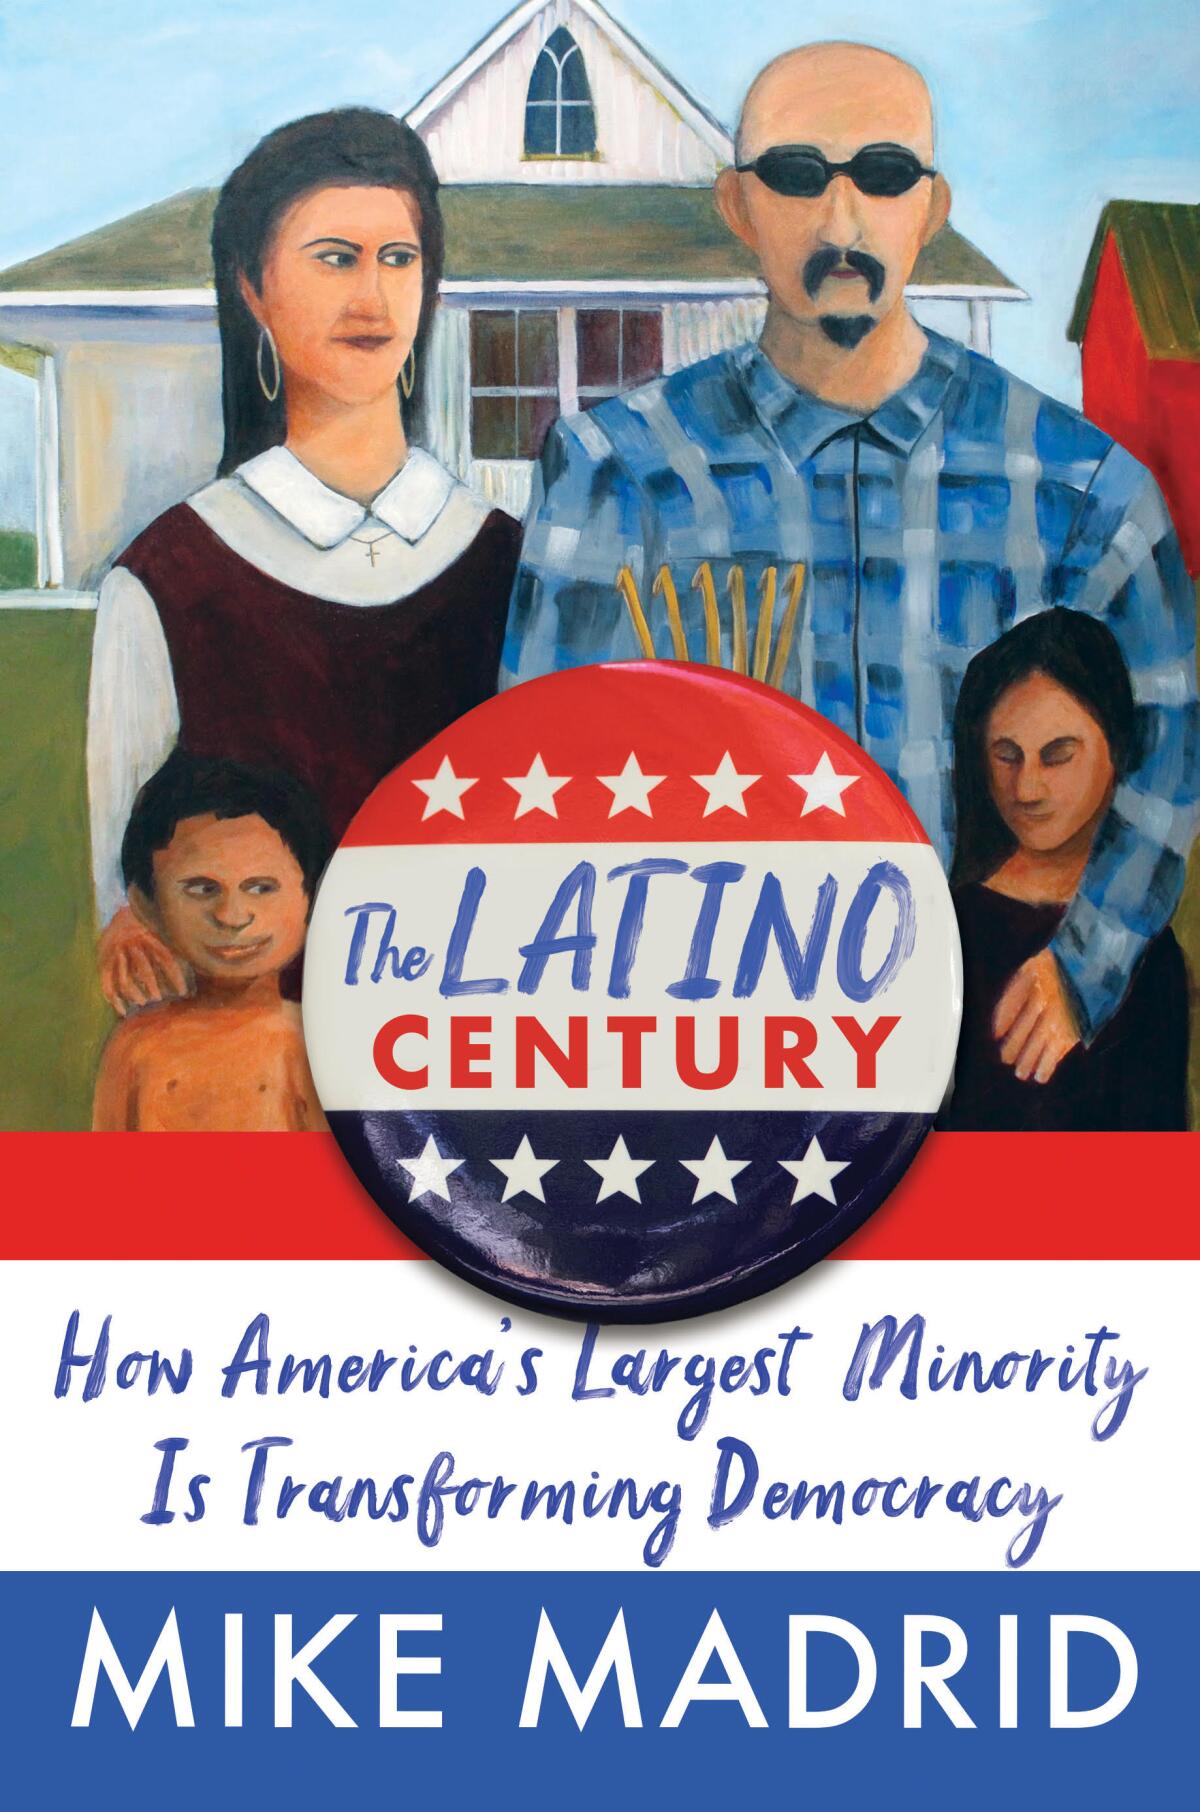 The red, white and blue cover for "The Latino Century" depicts a woman, a man and two children standing in front of a house